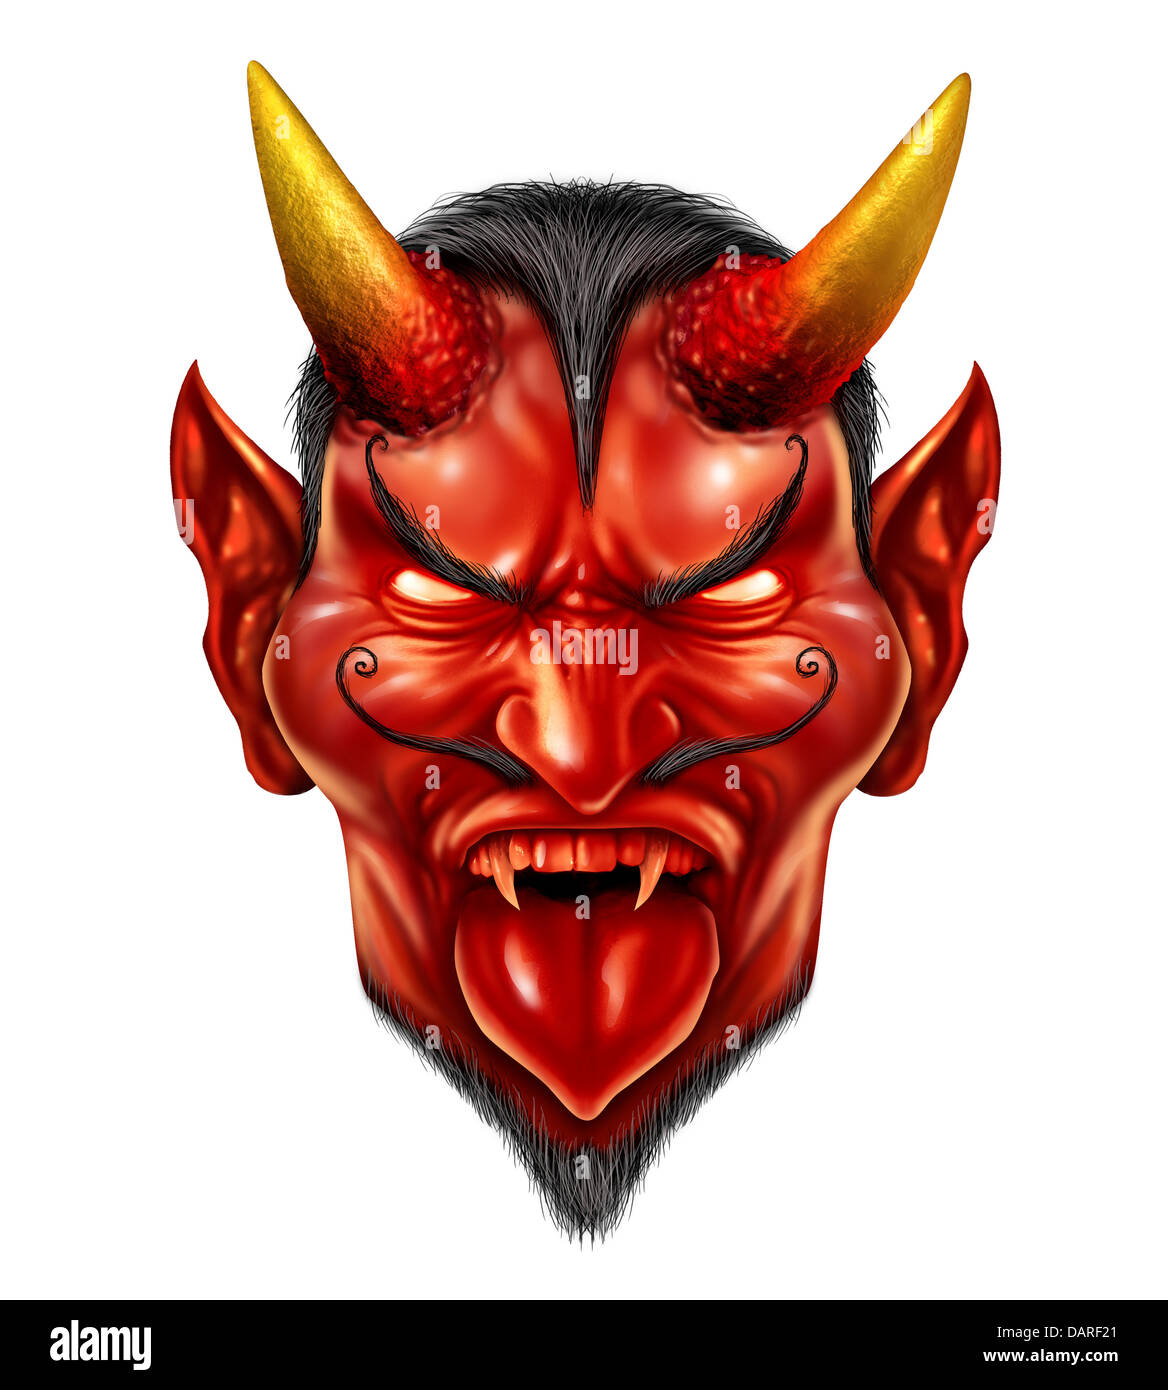 Devil demon halloween monster character with a devilish evil grin as a spooky hot and spicy concept with a red skin horned beast creature and dangerous fangs on a white background. Stock Photo